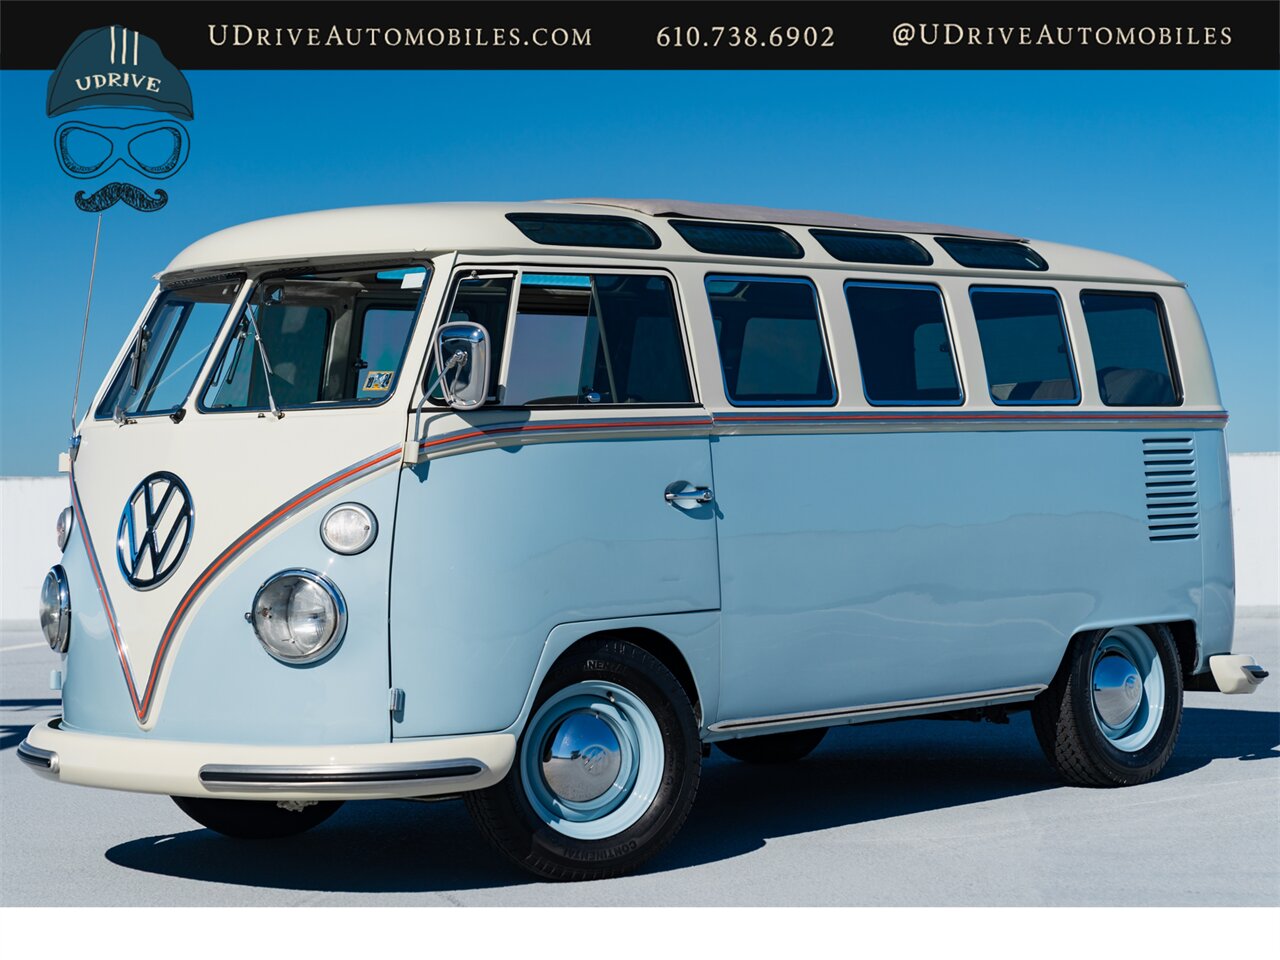 1965 Volkswagen Bus/Vanagon 21 Window Deluxe Transporter  Built By East Coast VW Restorations 1914cc A/C - Photo 1 - West Chester, PA 19382